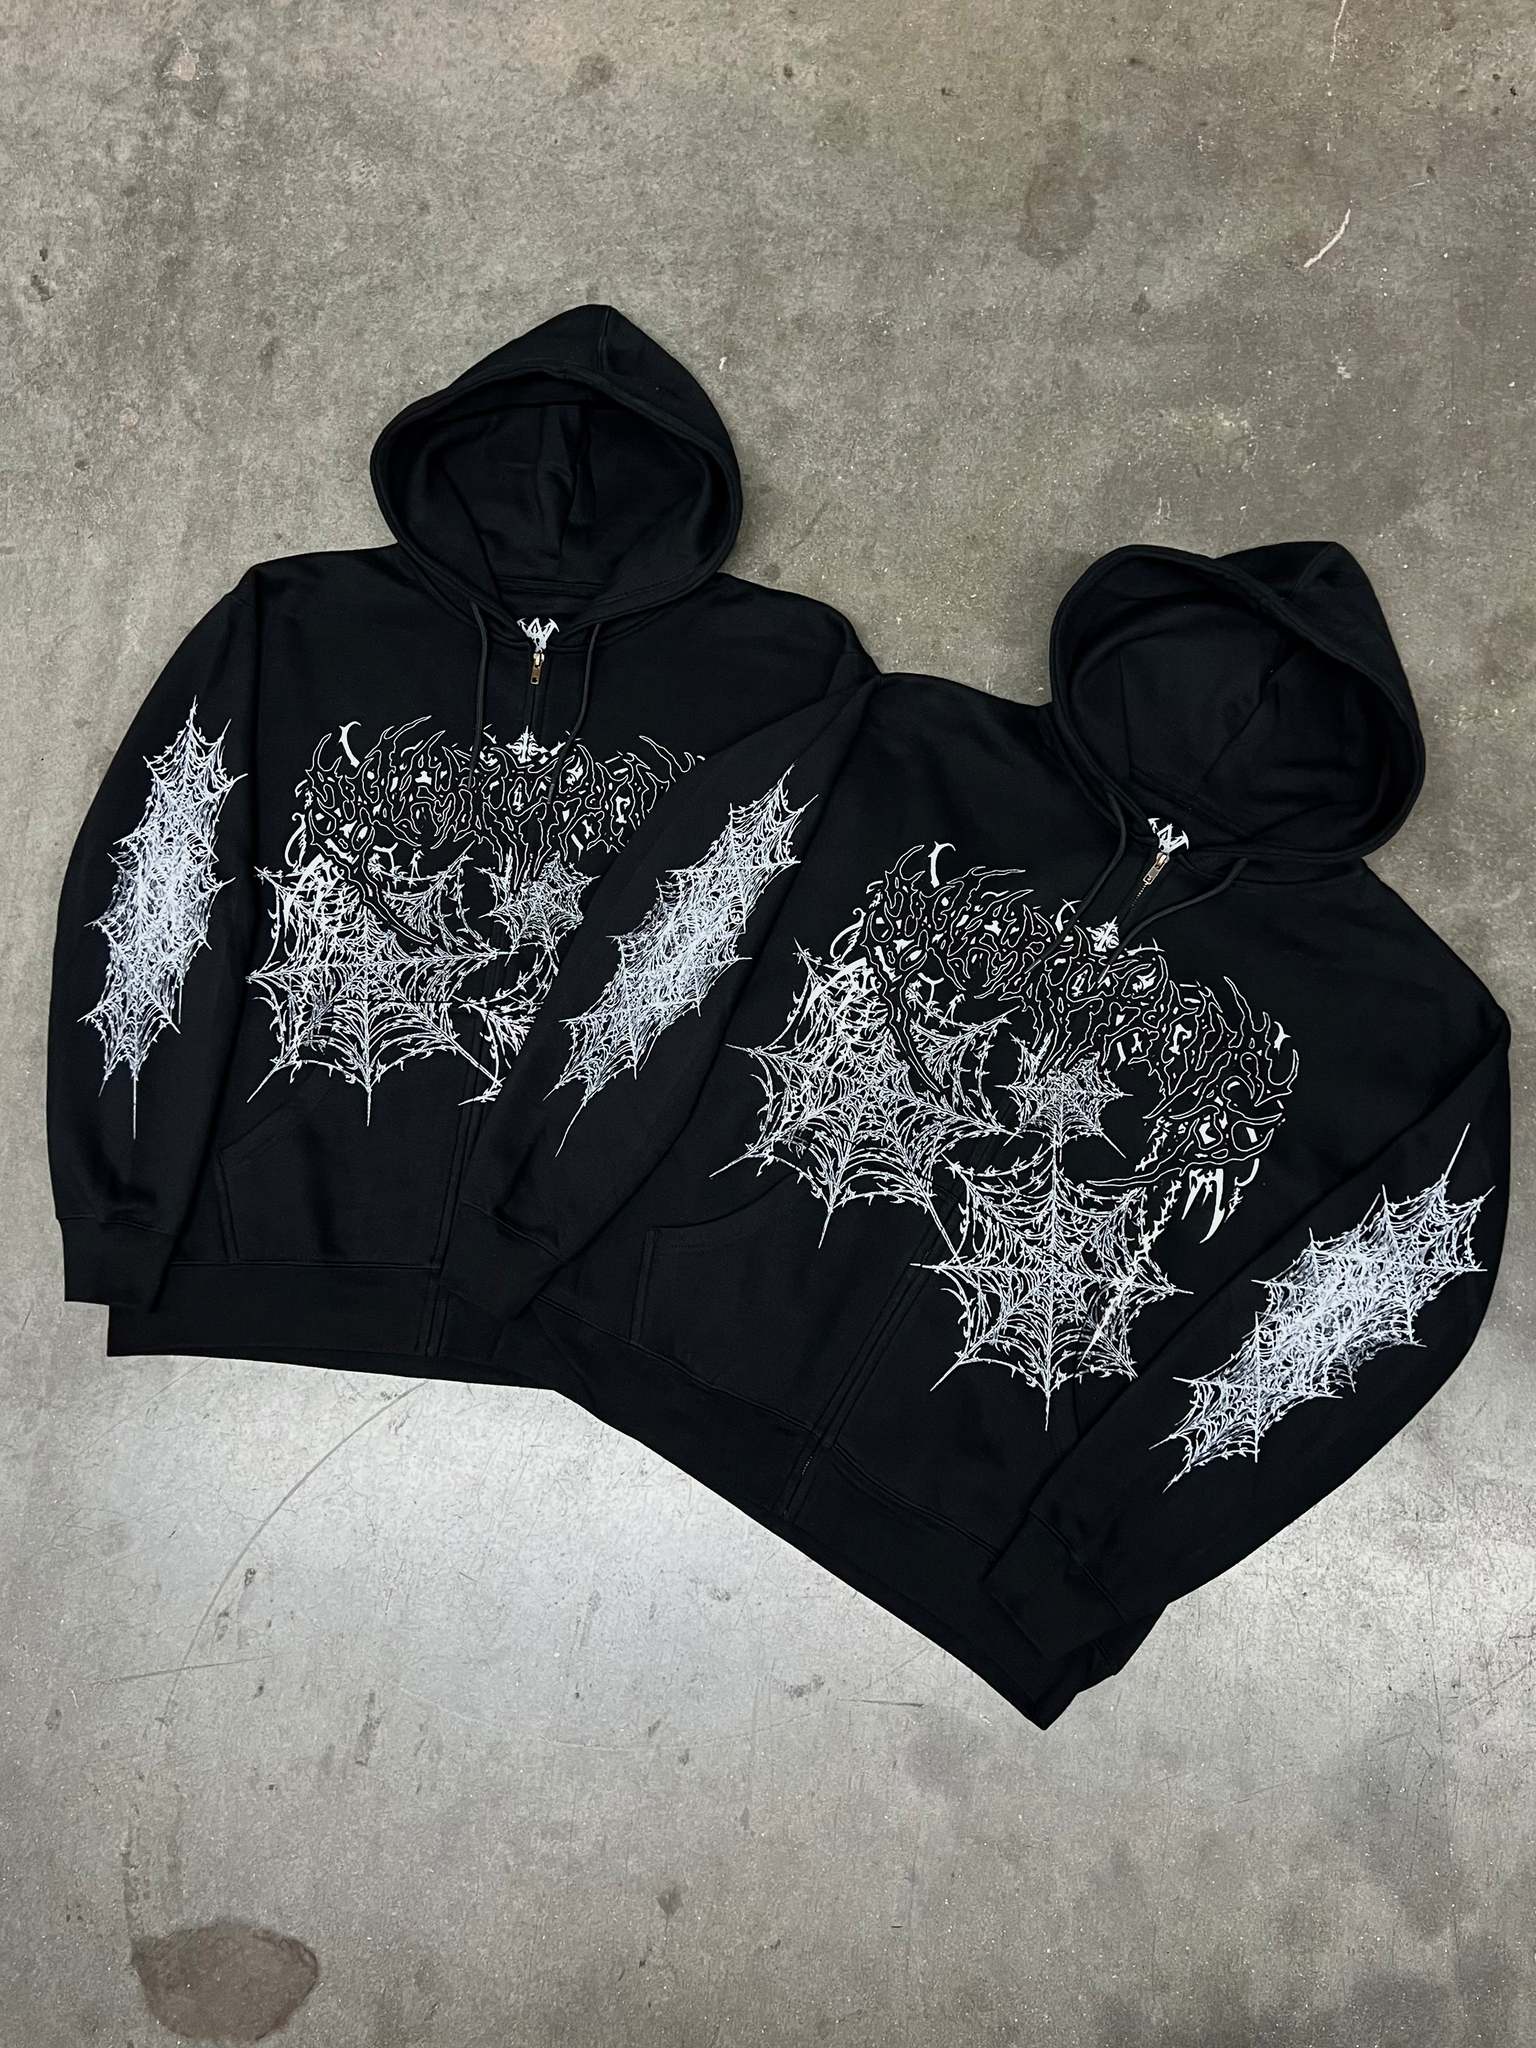 SPIDER ZIPUP (LIMITED RELEASE)